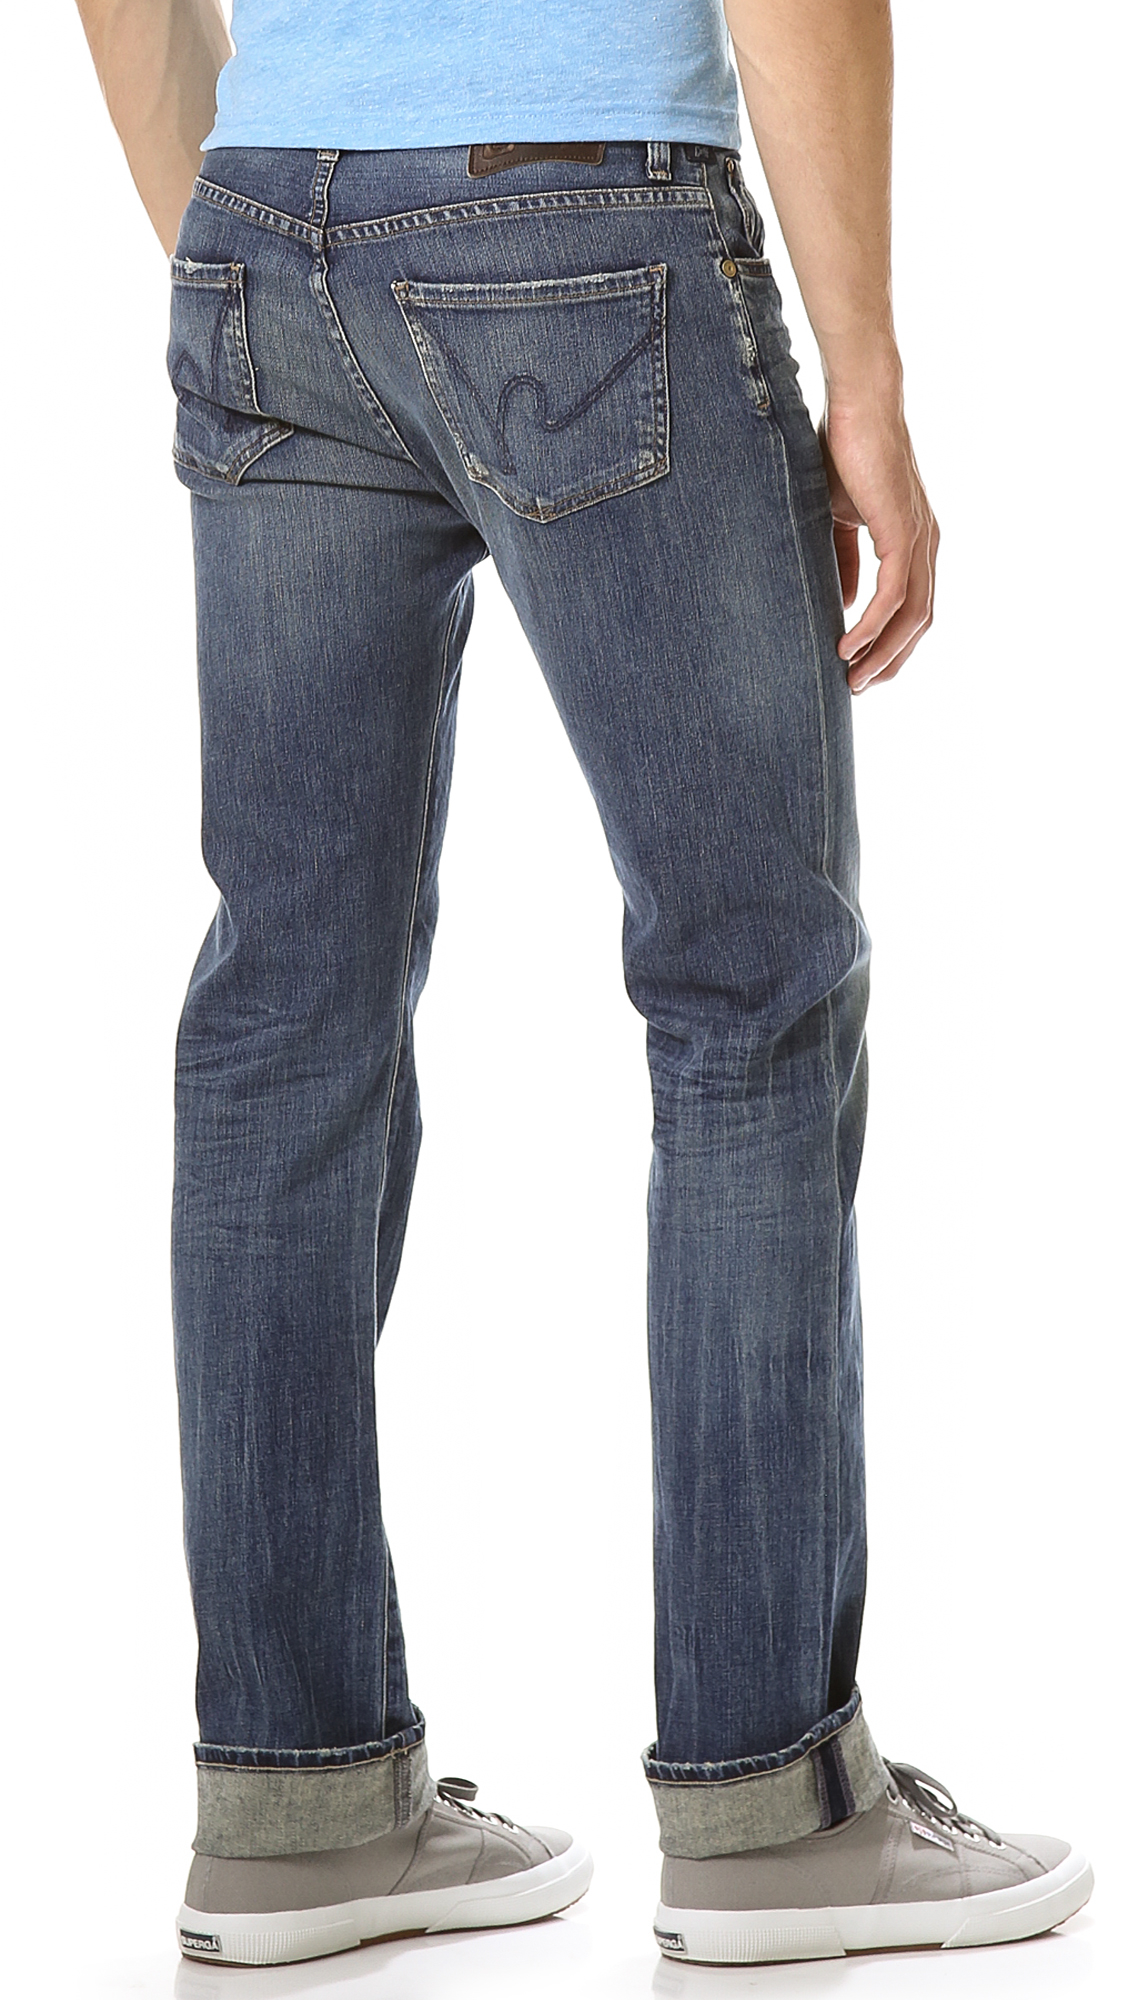 Lyst - Citizens Of Humanity Core Slim Straight Jeans in Blue for Men